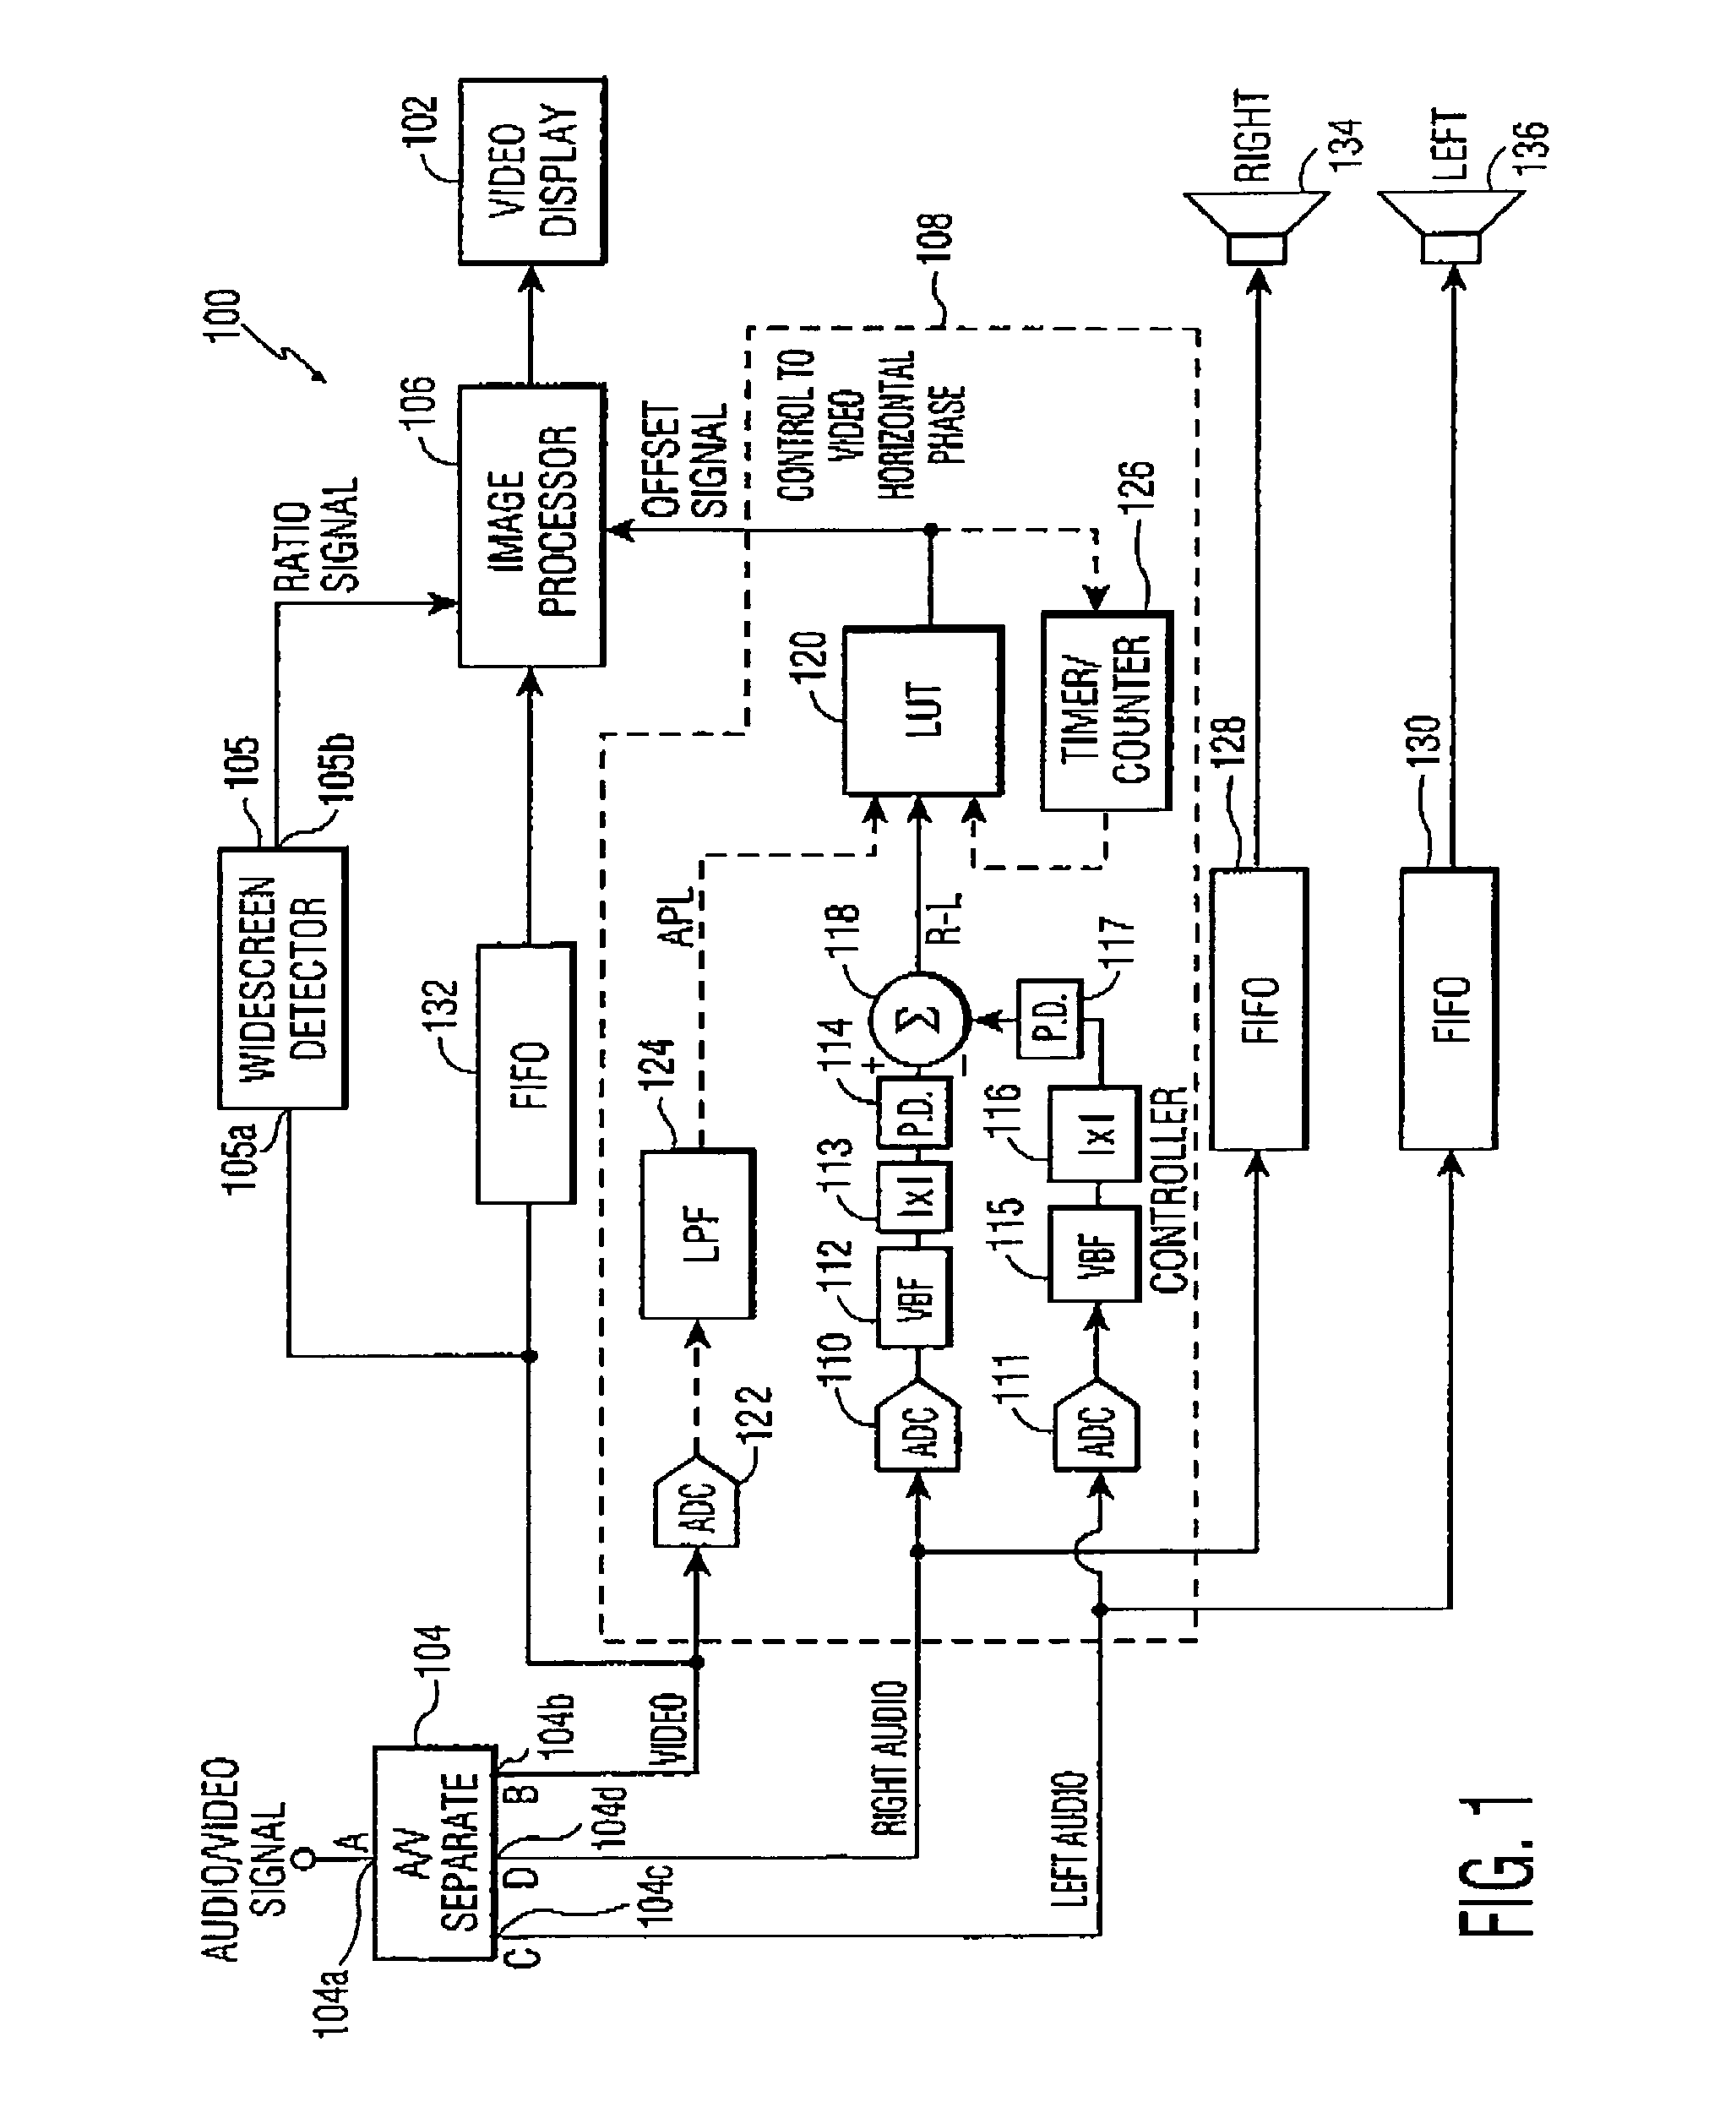 Method, apparatus, and system for displaying widescreen video images on standard video displays